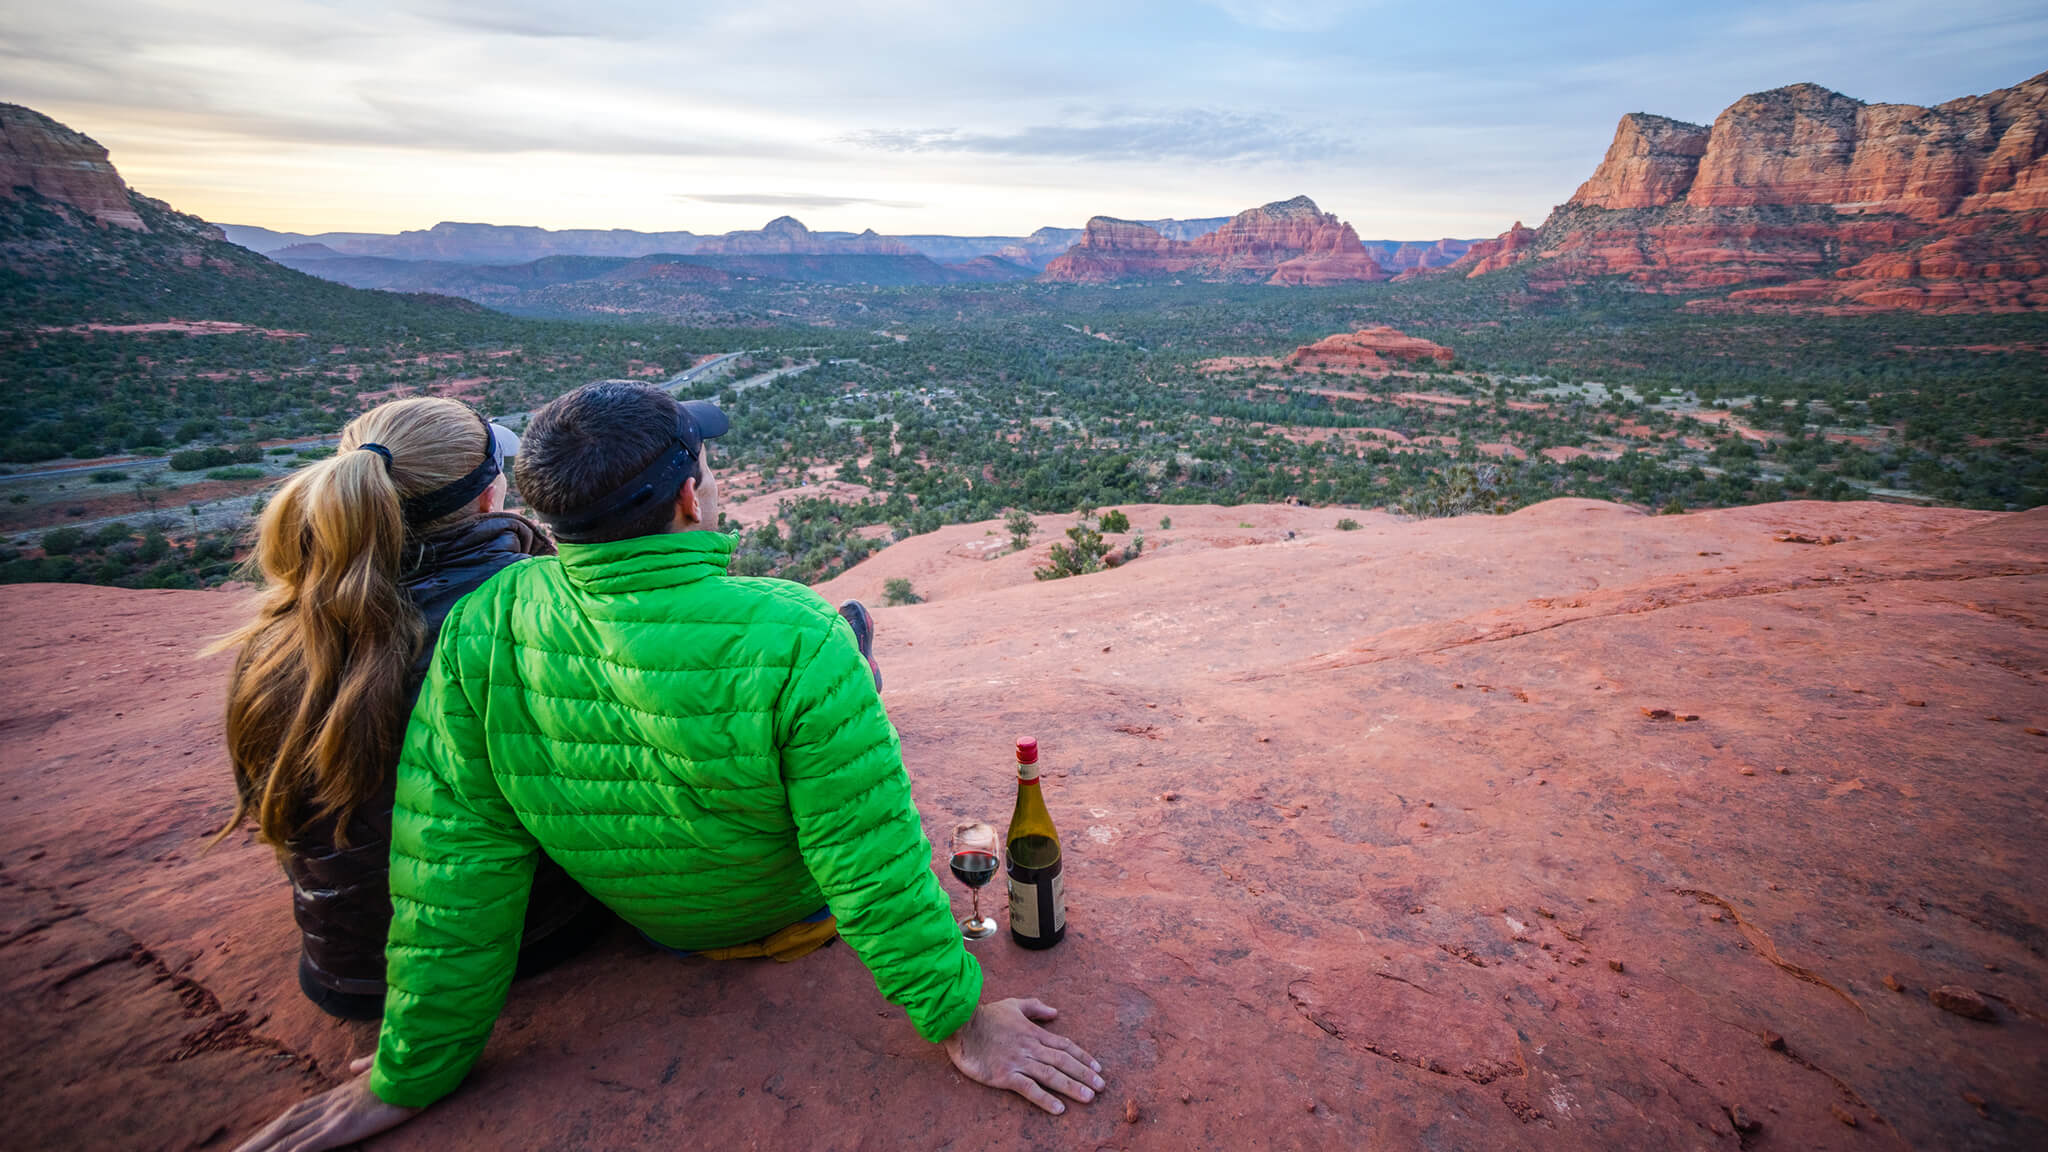 A view of Arizona red rocks with a glass of wine